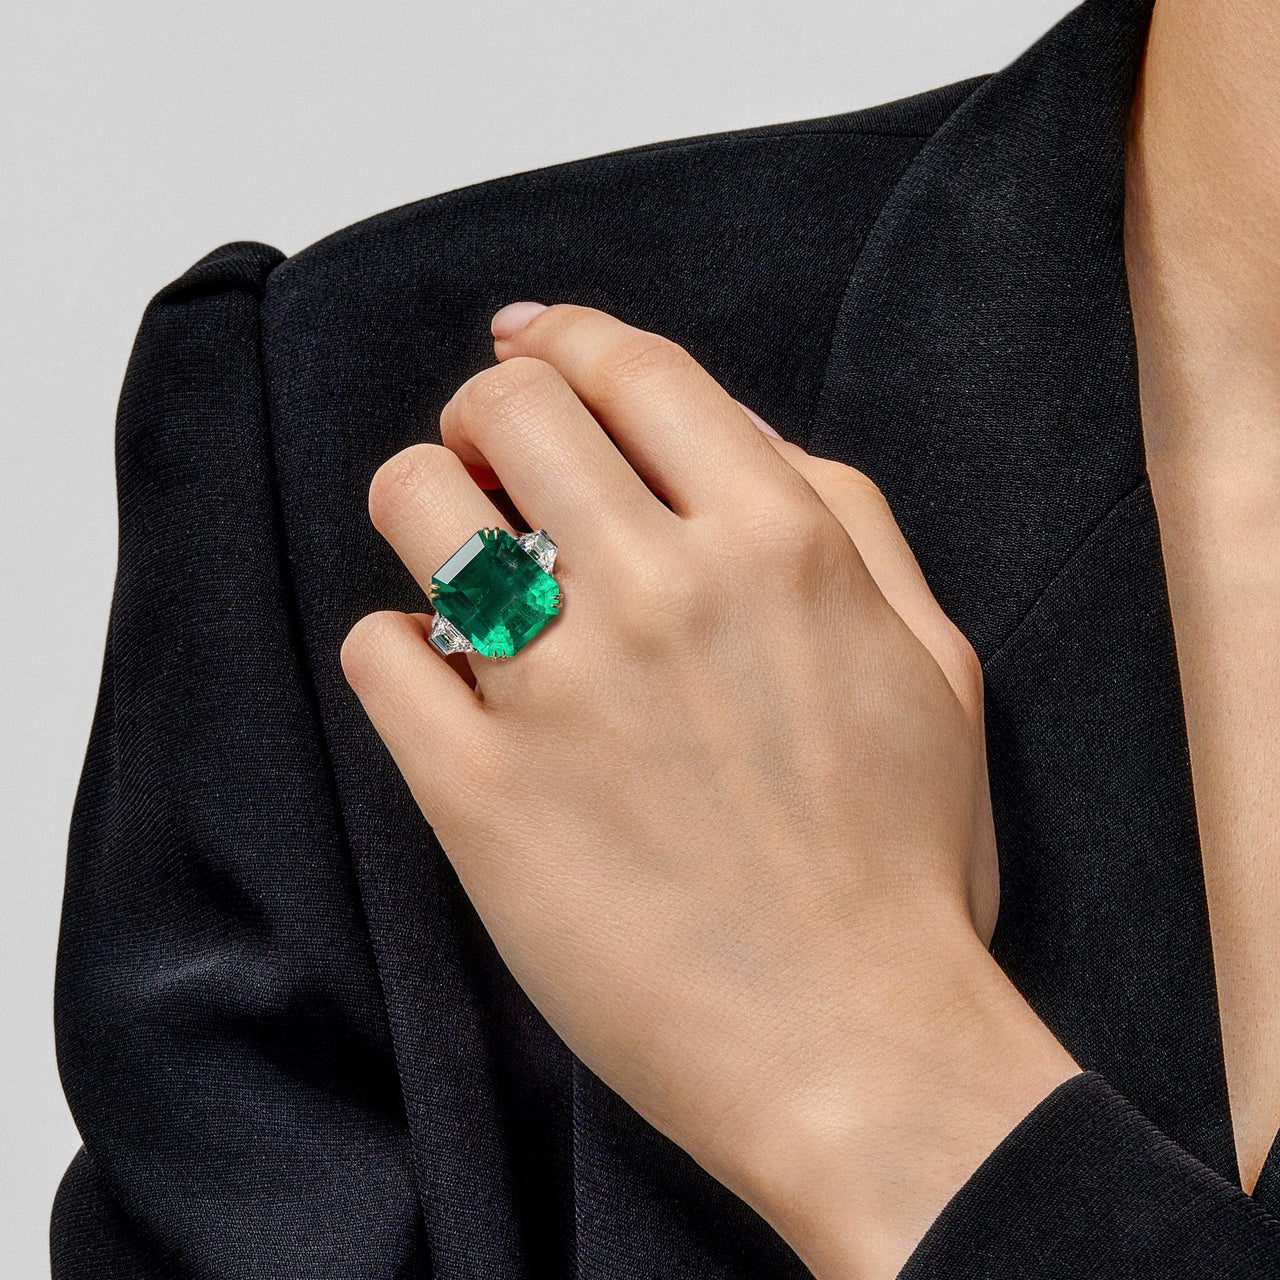 One-of-a-Kind Octagonal-Cut Colombian Emerald Ring With Diamonds